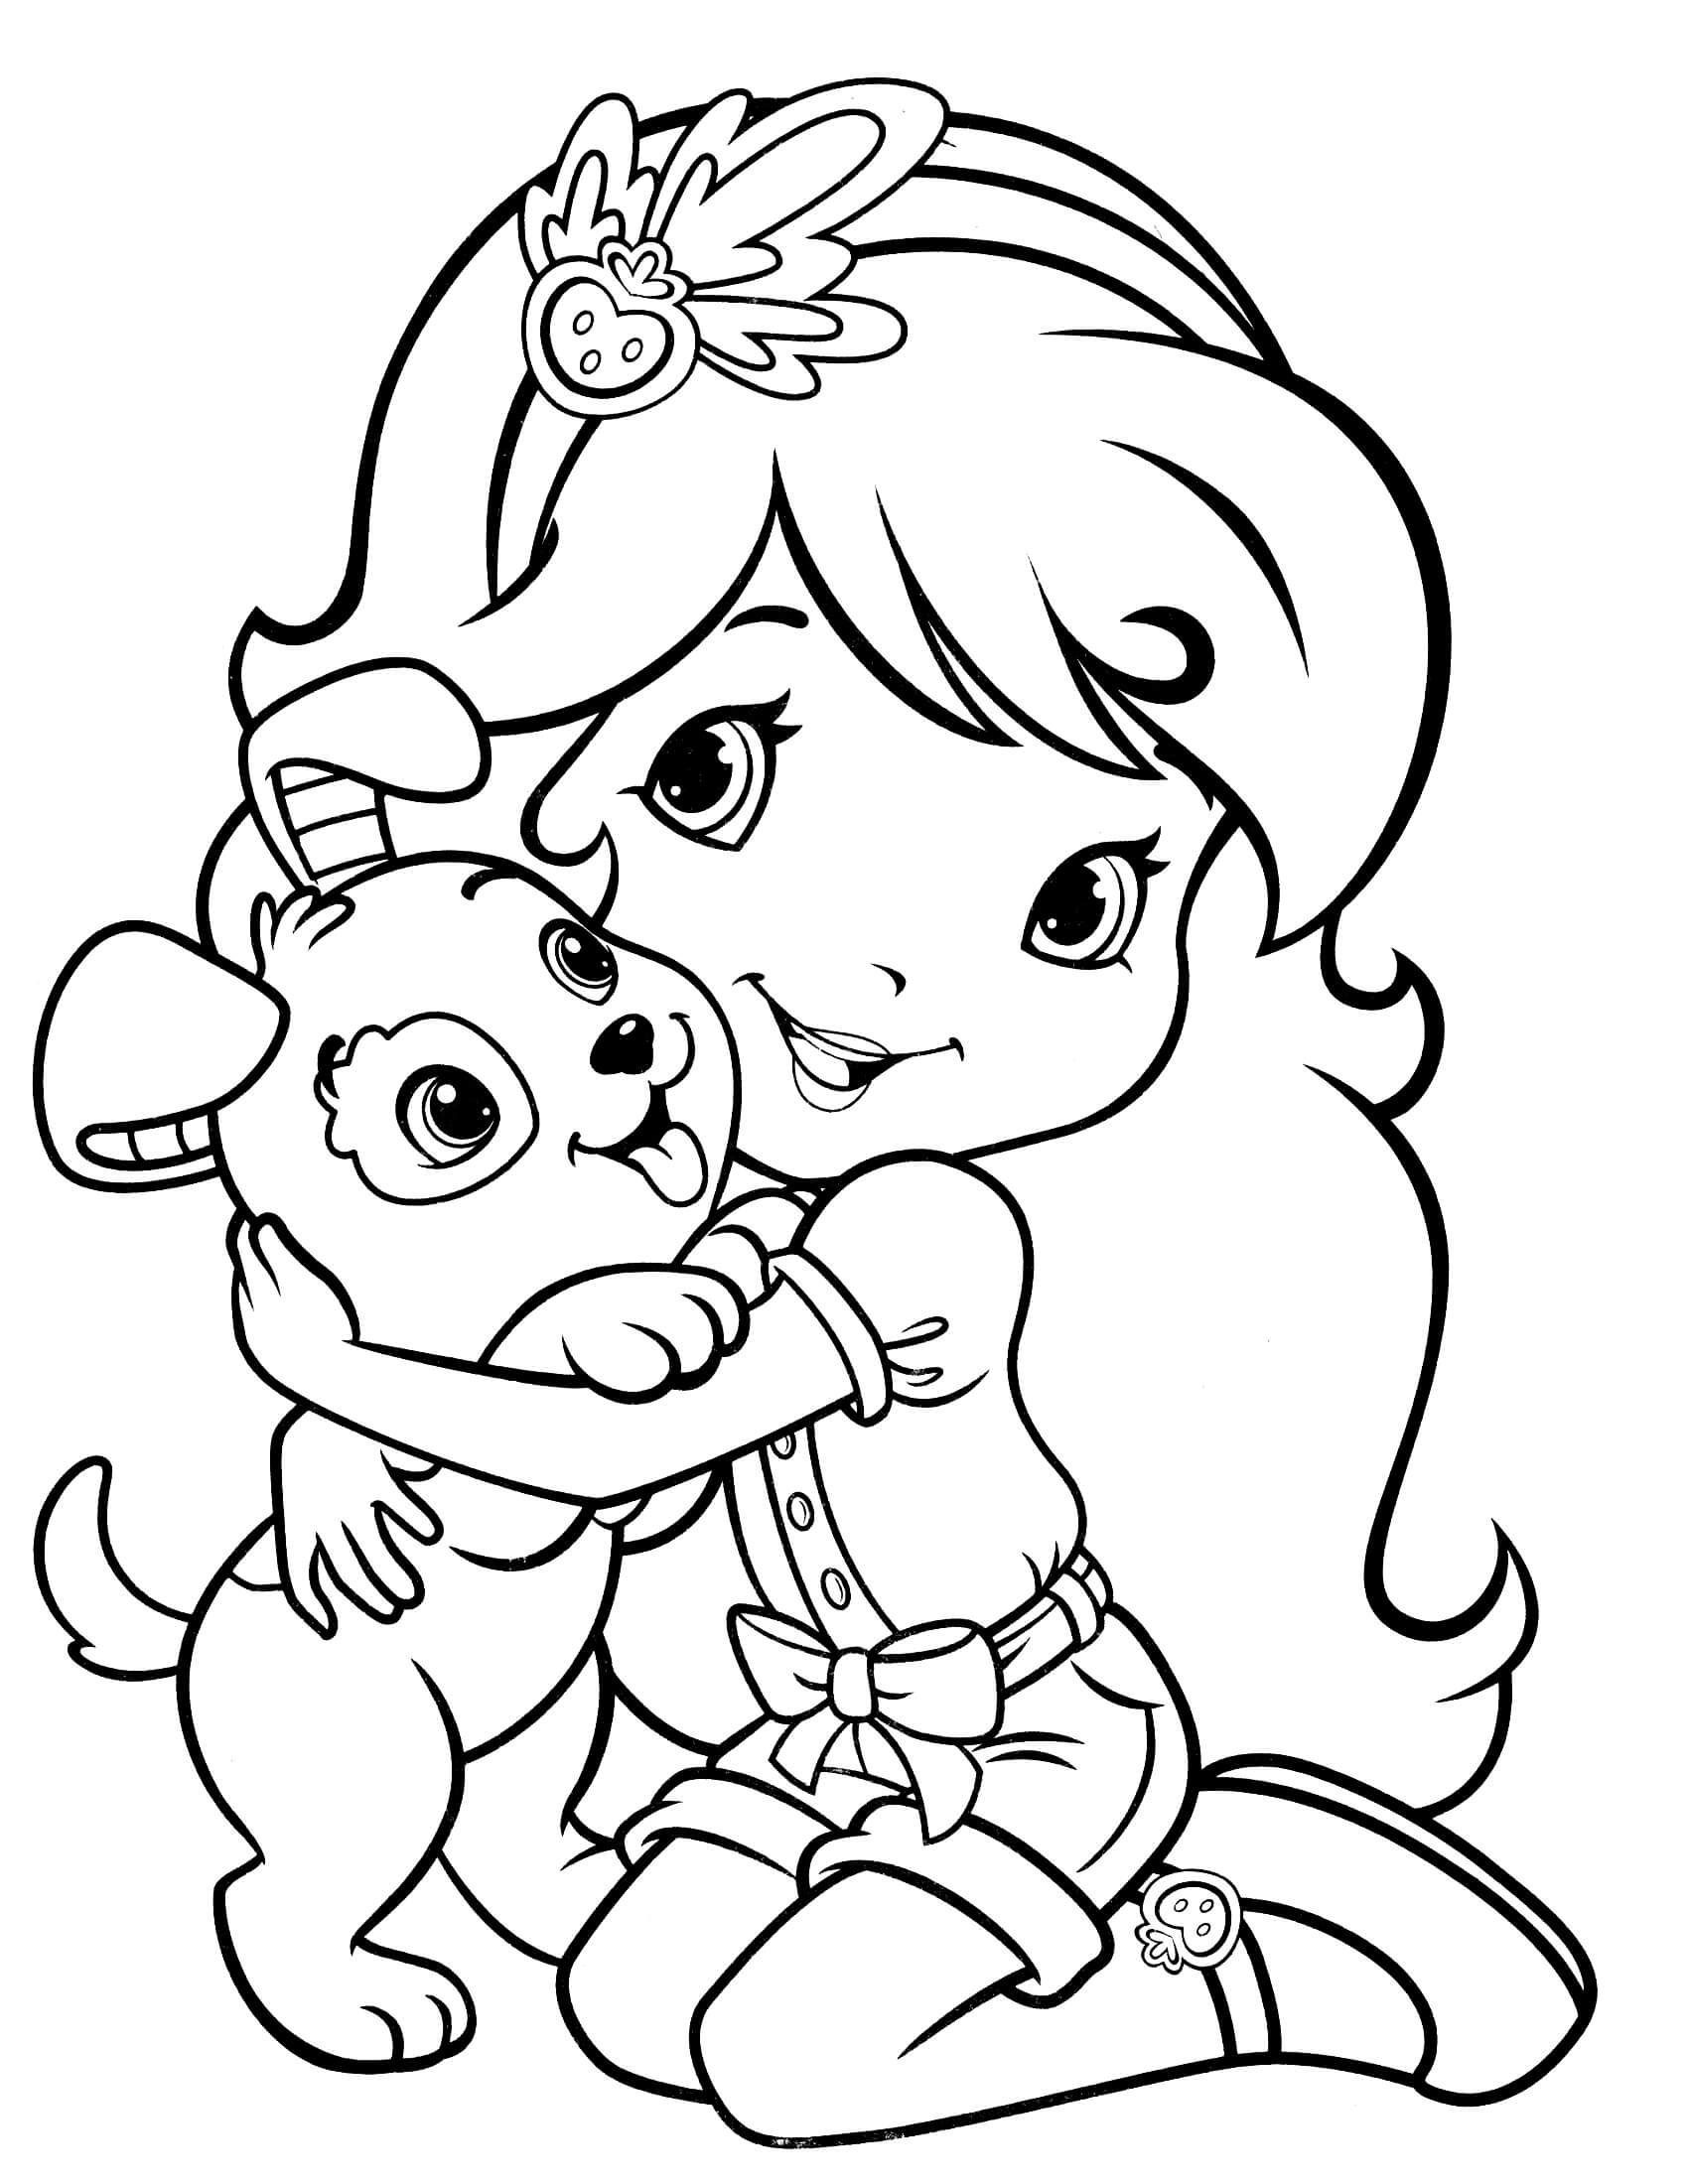 Strawberry Shortcake Coloring Pages for Teens